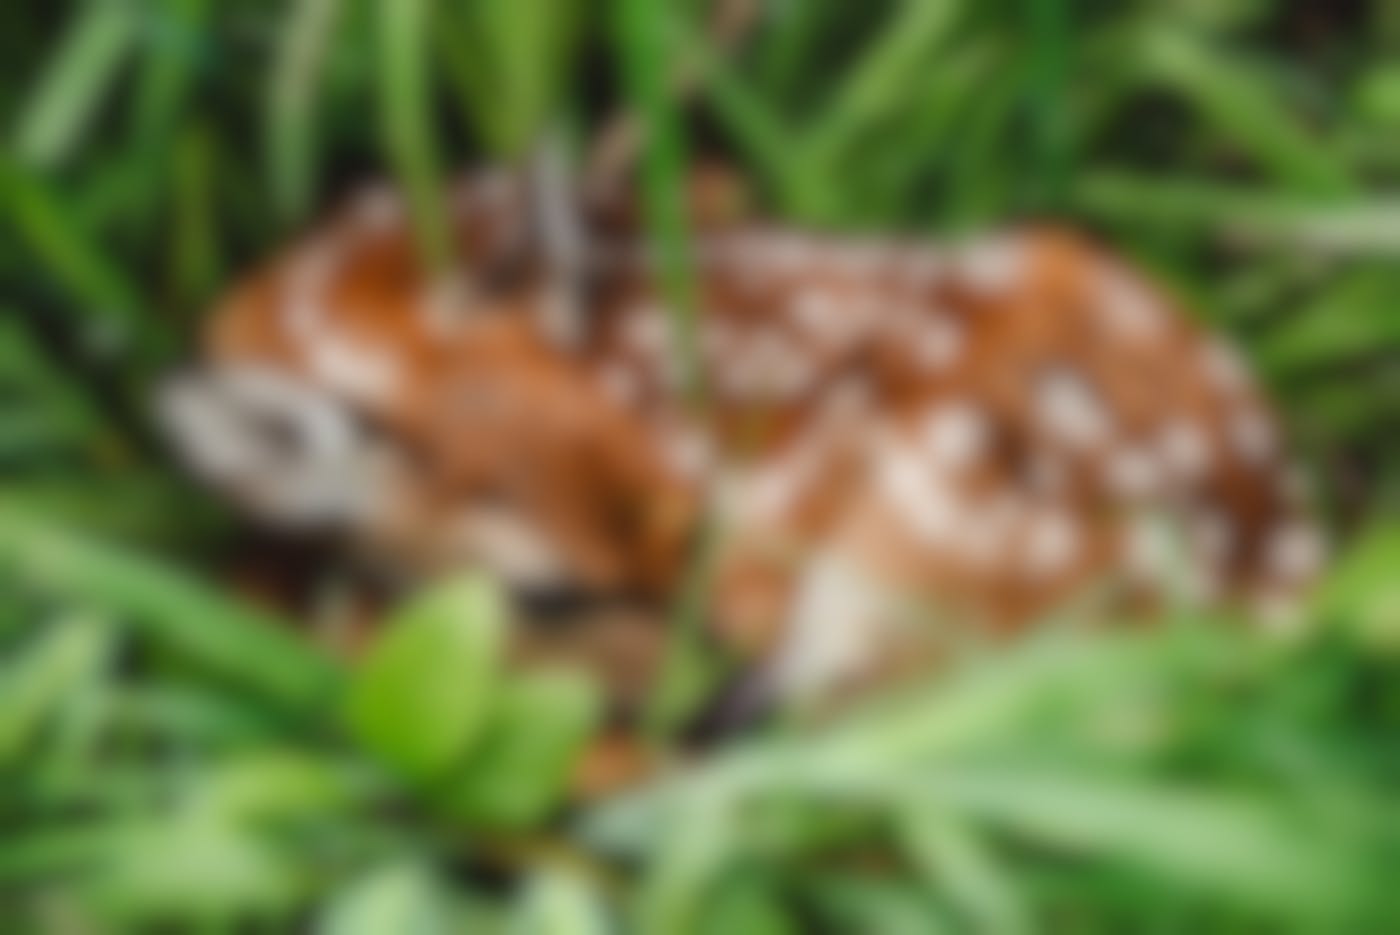 a fawn curled up in high grass